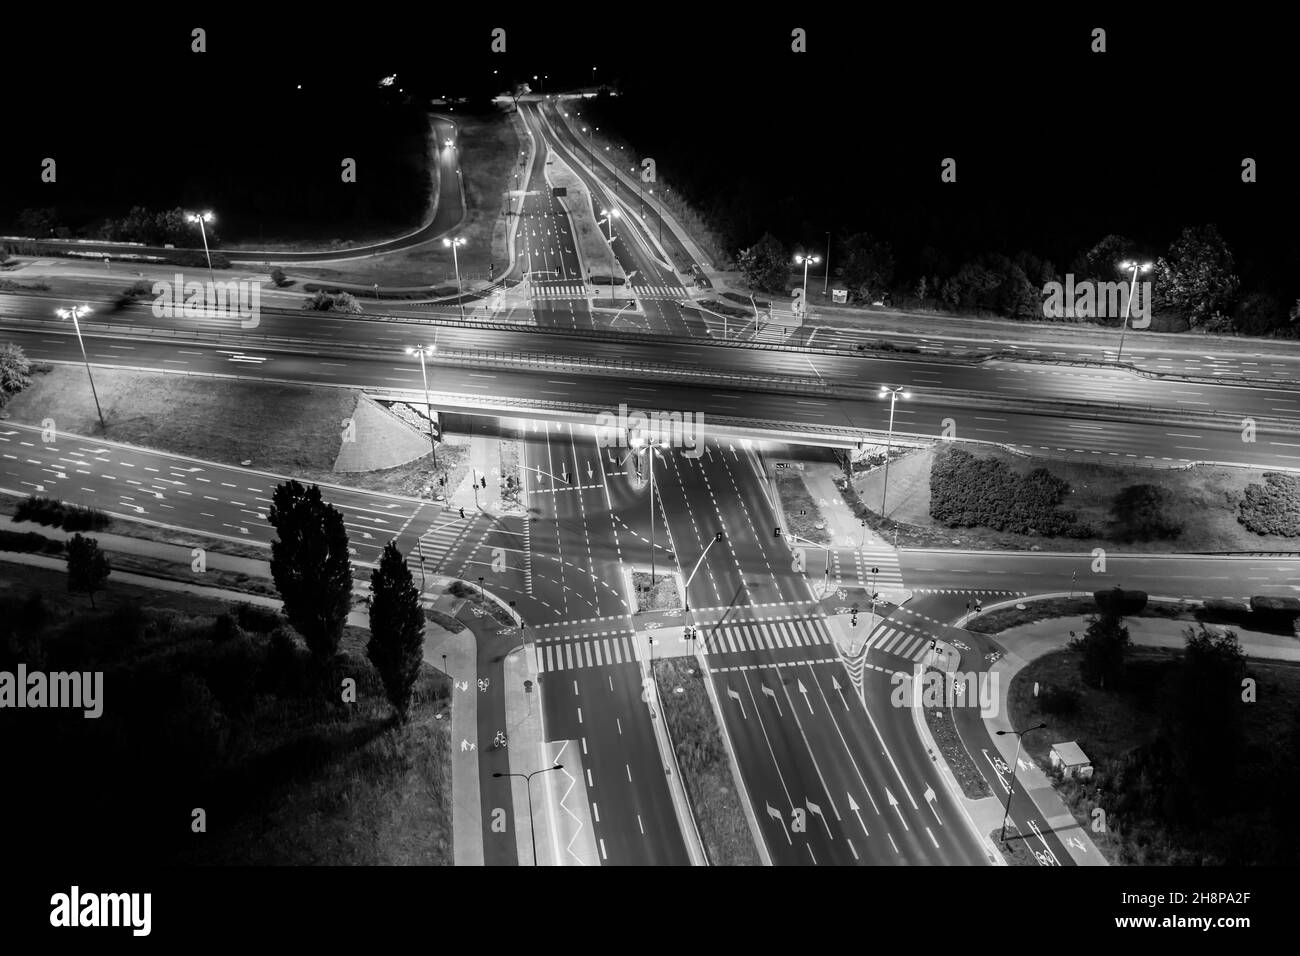 Aerial view at junctions of city highway. Vehicles drive on road Stock Photo